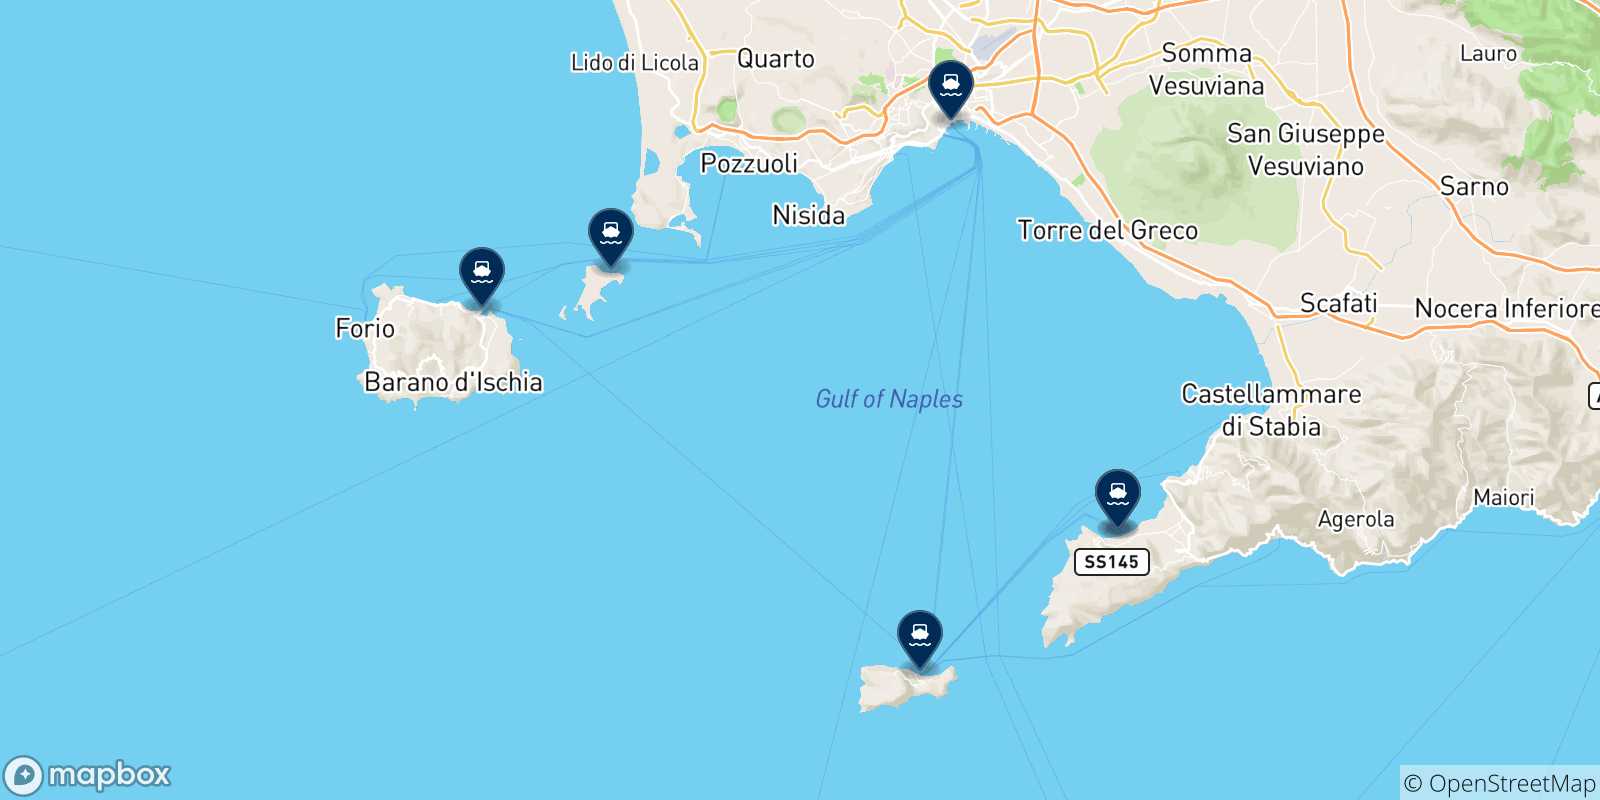 Map of the possible routes between Sorrento and Italy